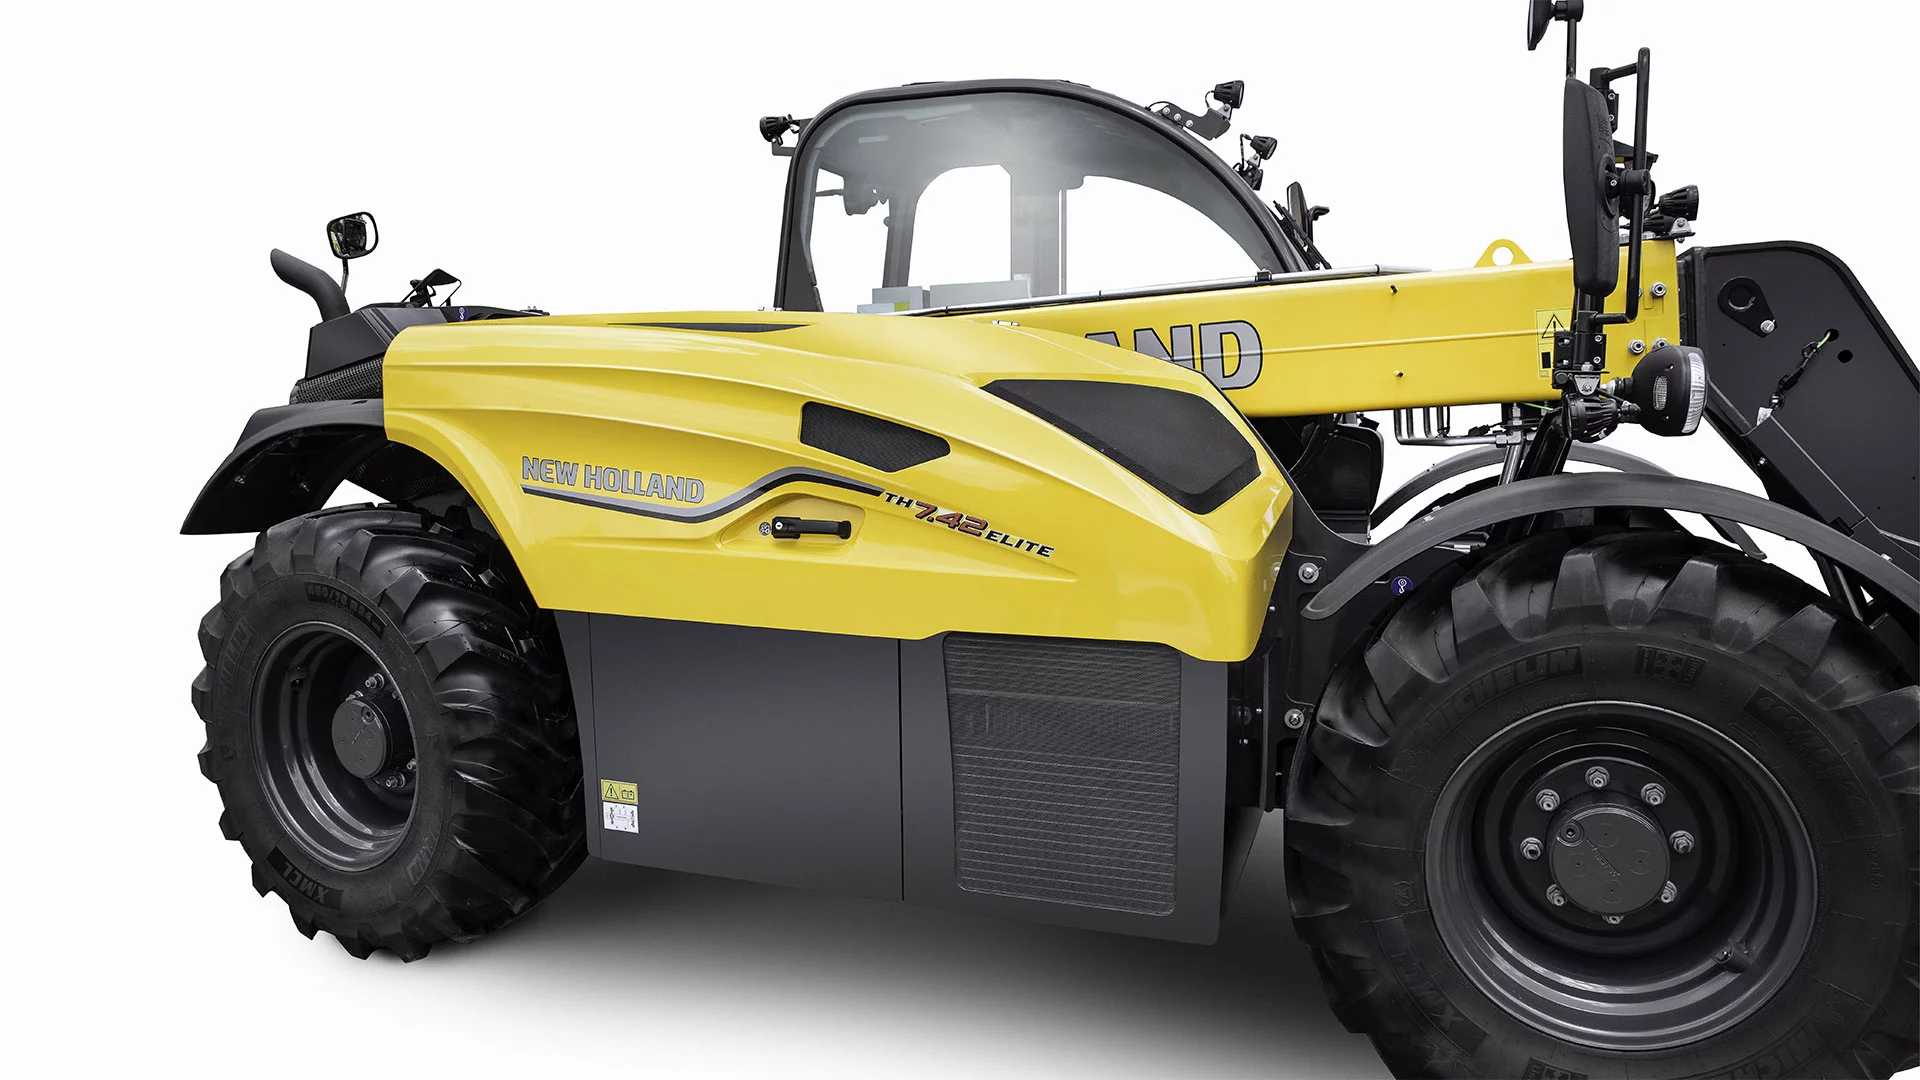 Close-up view of a New Holland TH 7.42 Elite telehandler, highlighting its yellow and black design, large tires, and detailed bodywork.